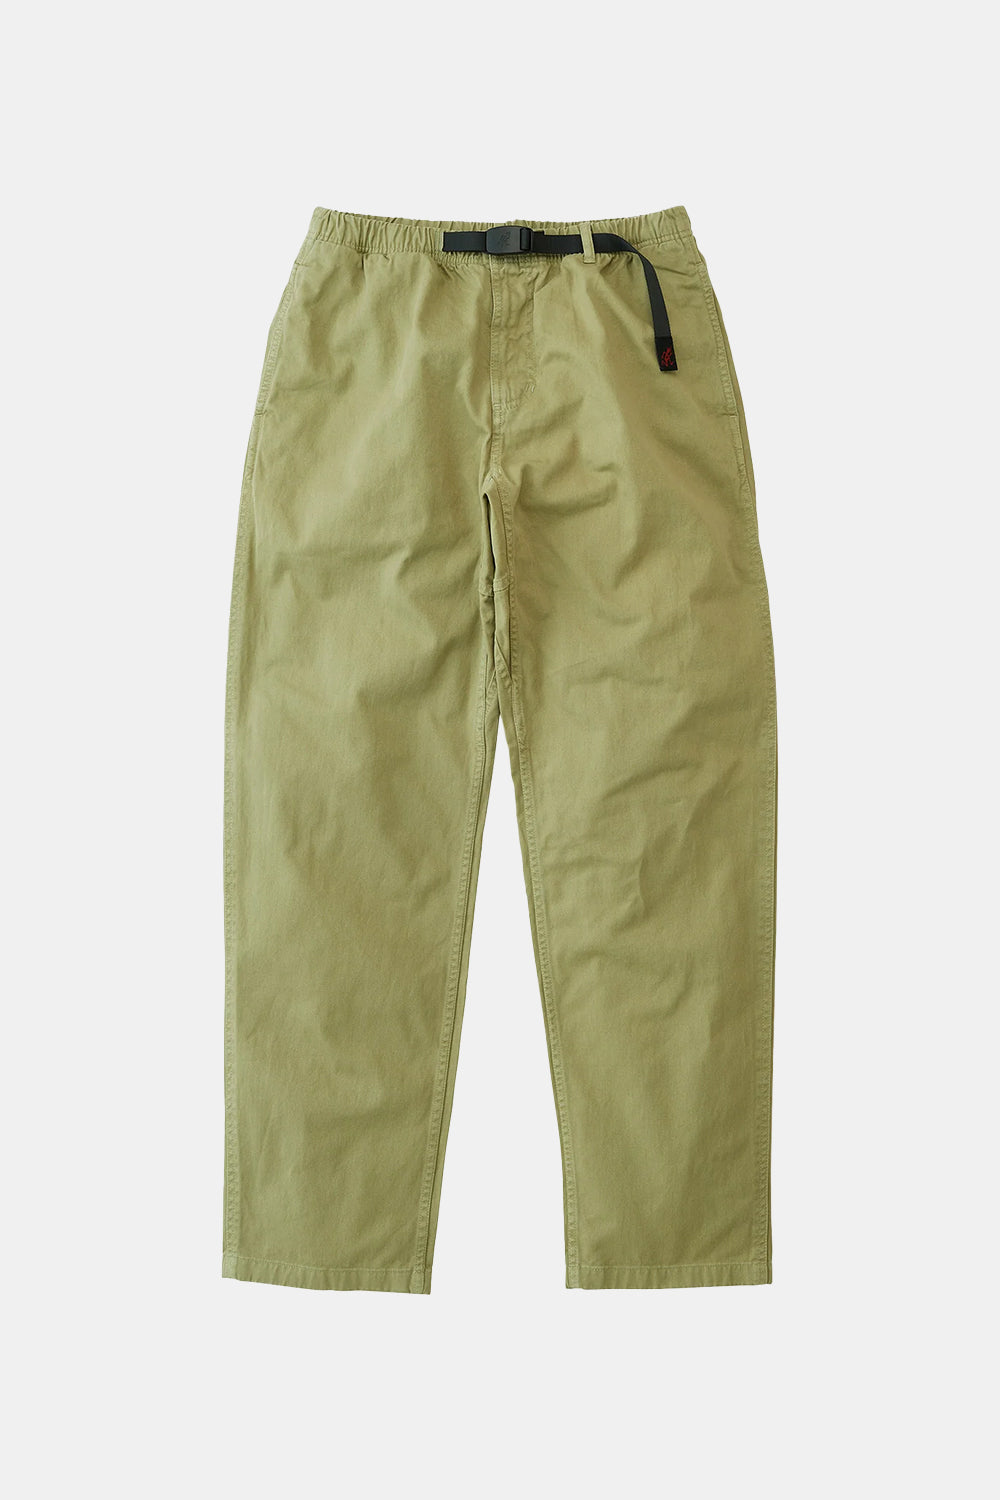 Gramicci G Pants Double-ringspun Organic Cotton Twill (Faded Olive)